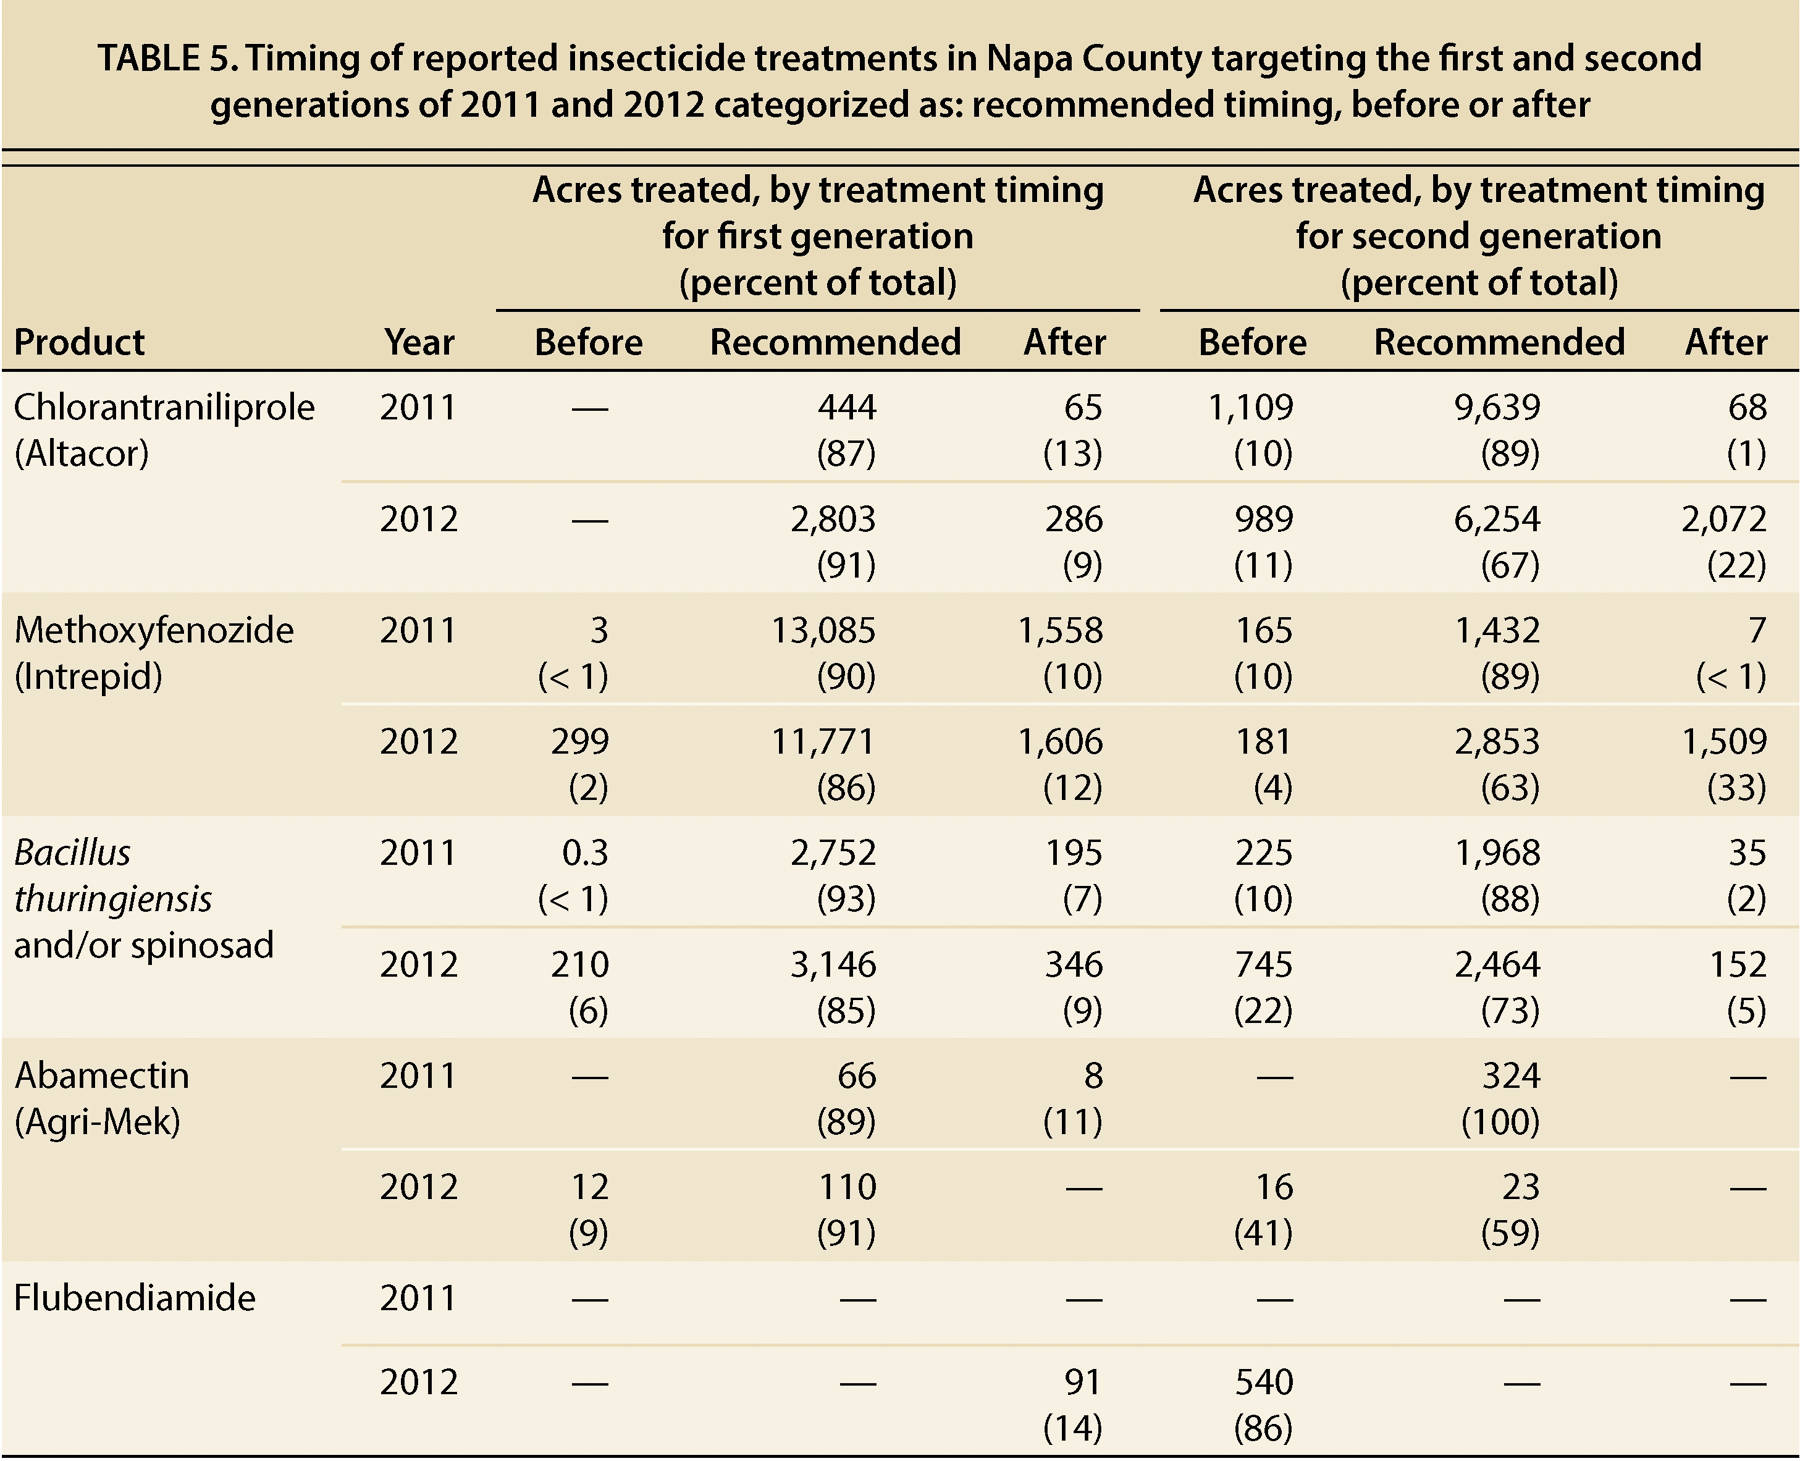 Timing of reported insecticide treatments in Napa County targeting the first and second generations of 2011 and 2012 categorized as: recommended timing, before or after